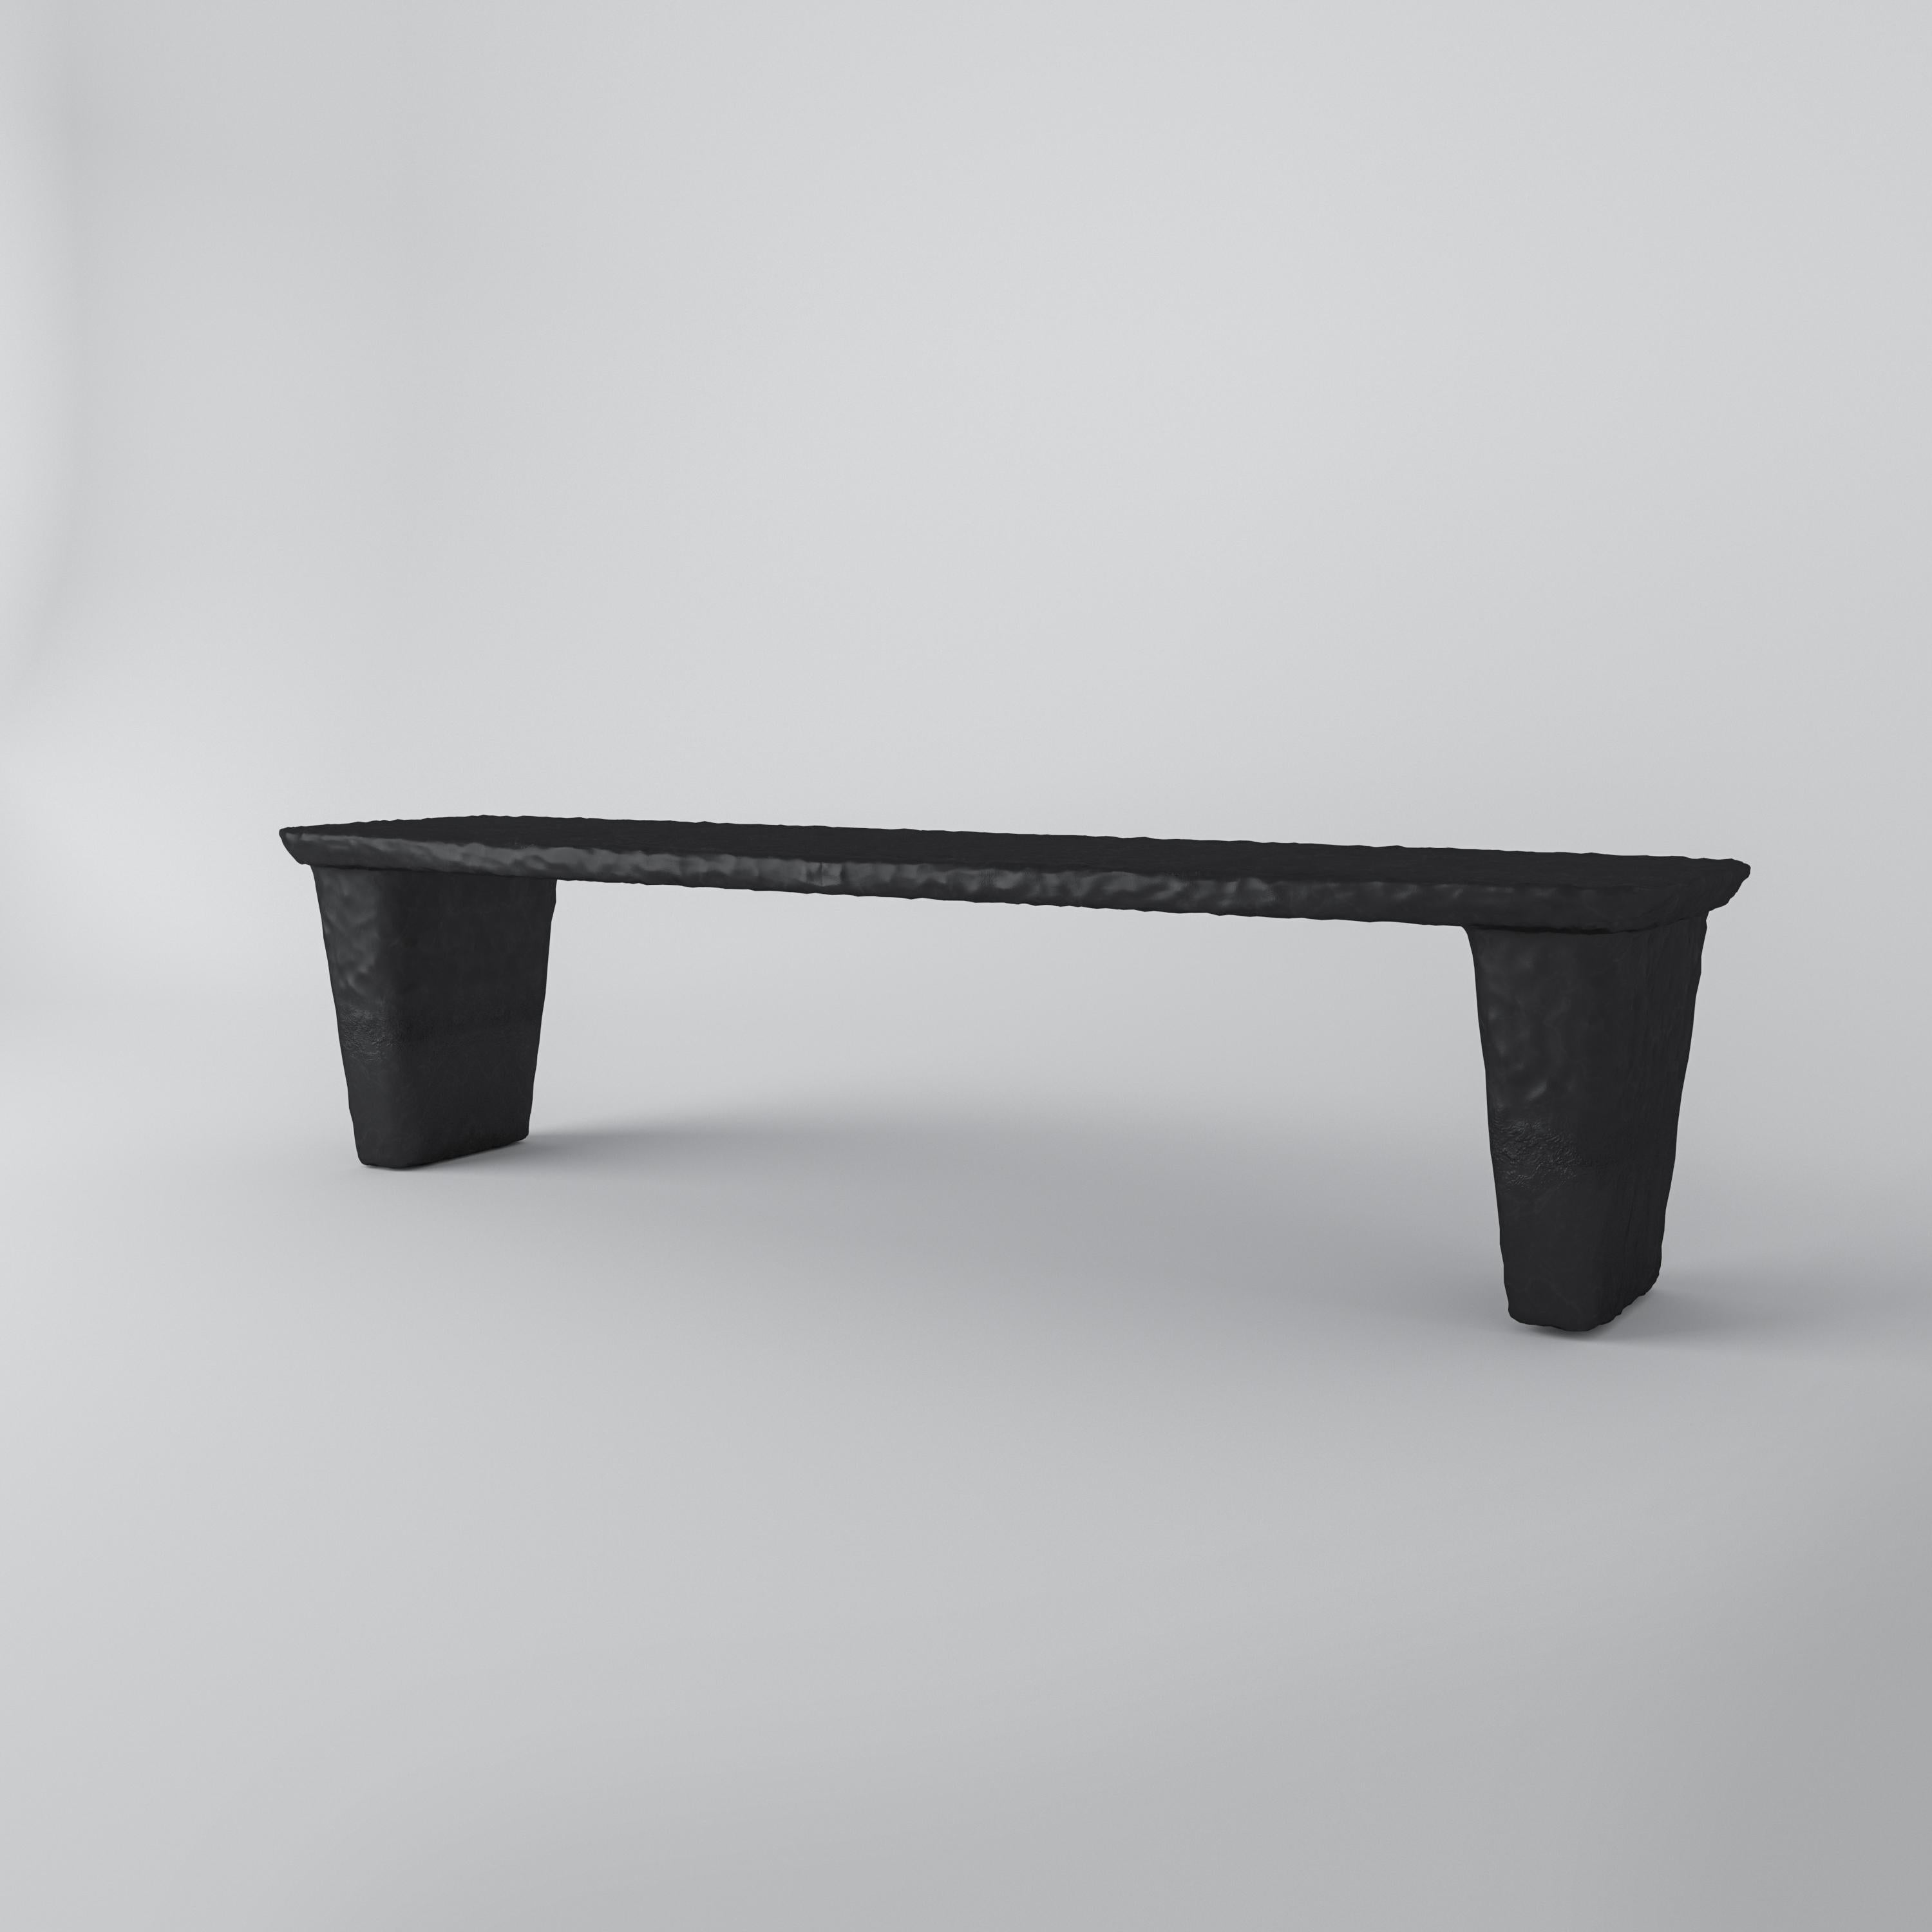 Sculpted contemporary coffee table by FAINA
Design: Victoriya Yakusha
Material: Steel, flax rubber, biopolymer, cellulose
Dimensions and weight
120 x 30 x 30 cm
24 kg
Outdoor Finish available, please contact us

Made in the style of ethnic